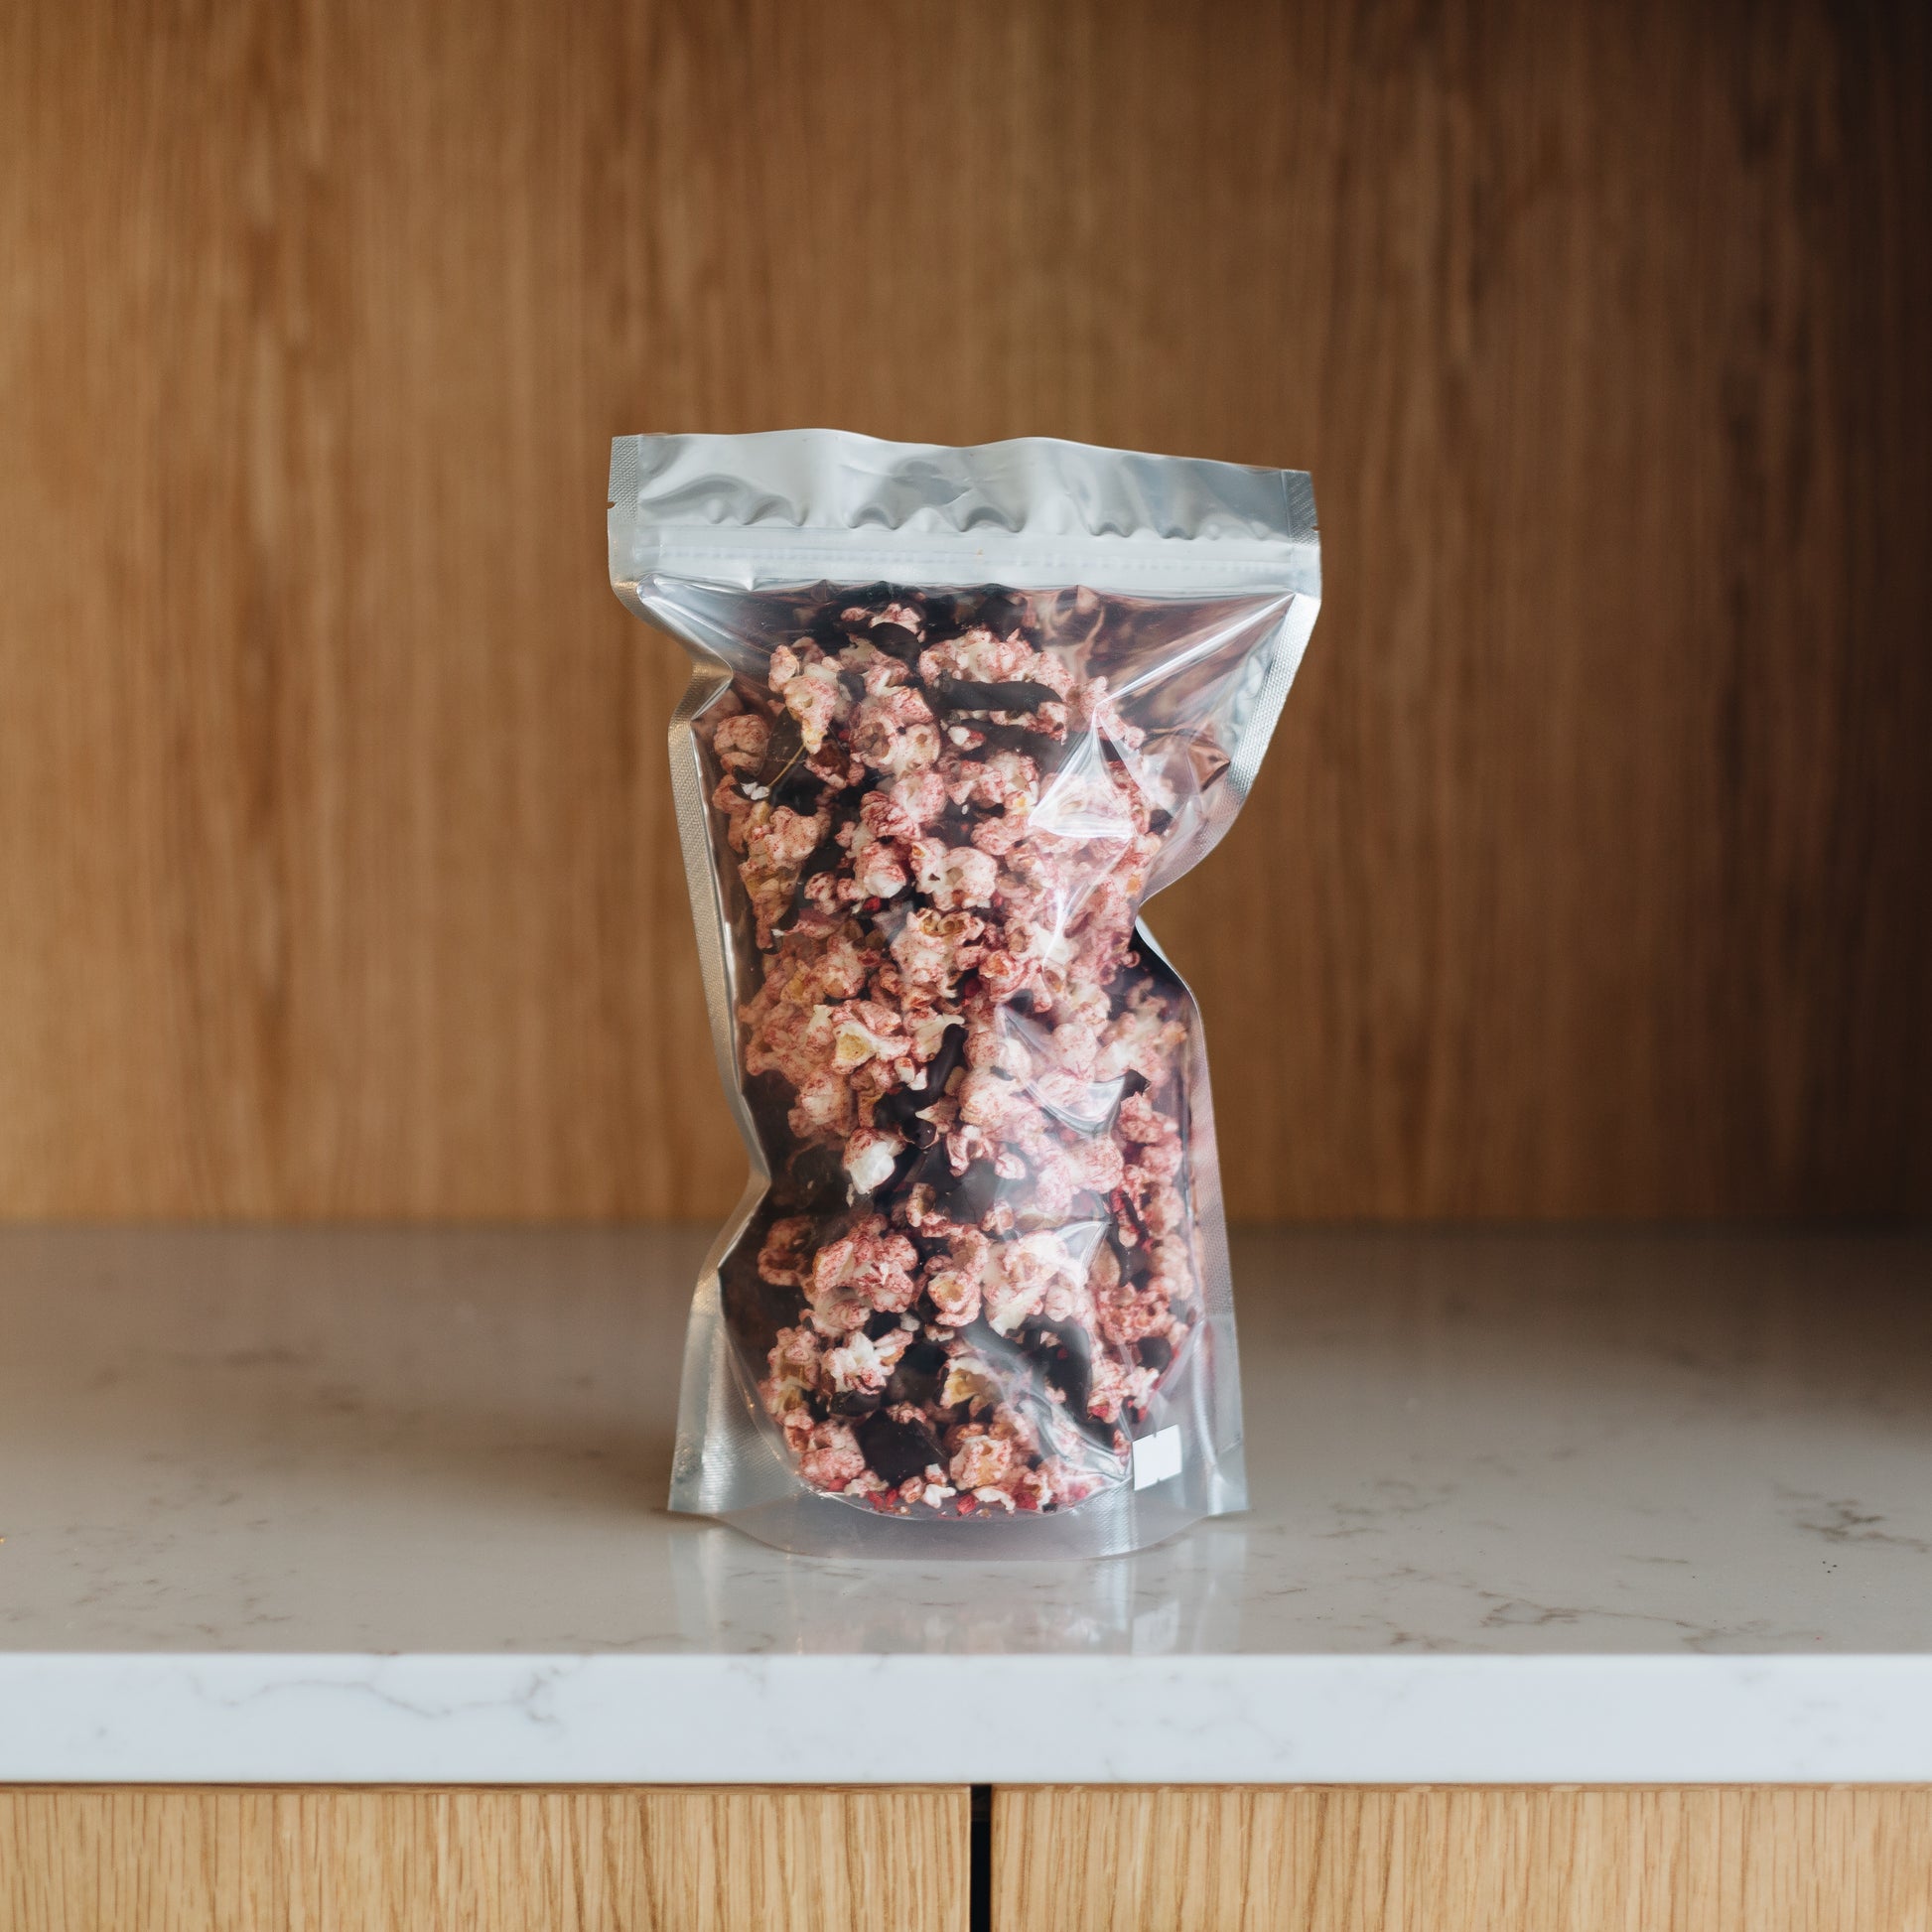 A truly gourmet popcorn. This raspberry chocolate popcorn is hand created with the freshest and highest quality ingredients to deliver an authentic Raspberry Chocolate popcorn. Order online now or stop in to get this delectable treat. Featured is our Large Bag of Raspberry Chocolate (4oz)